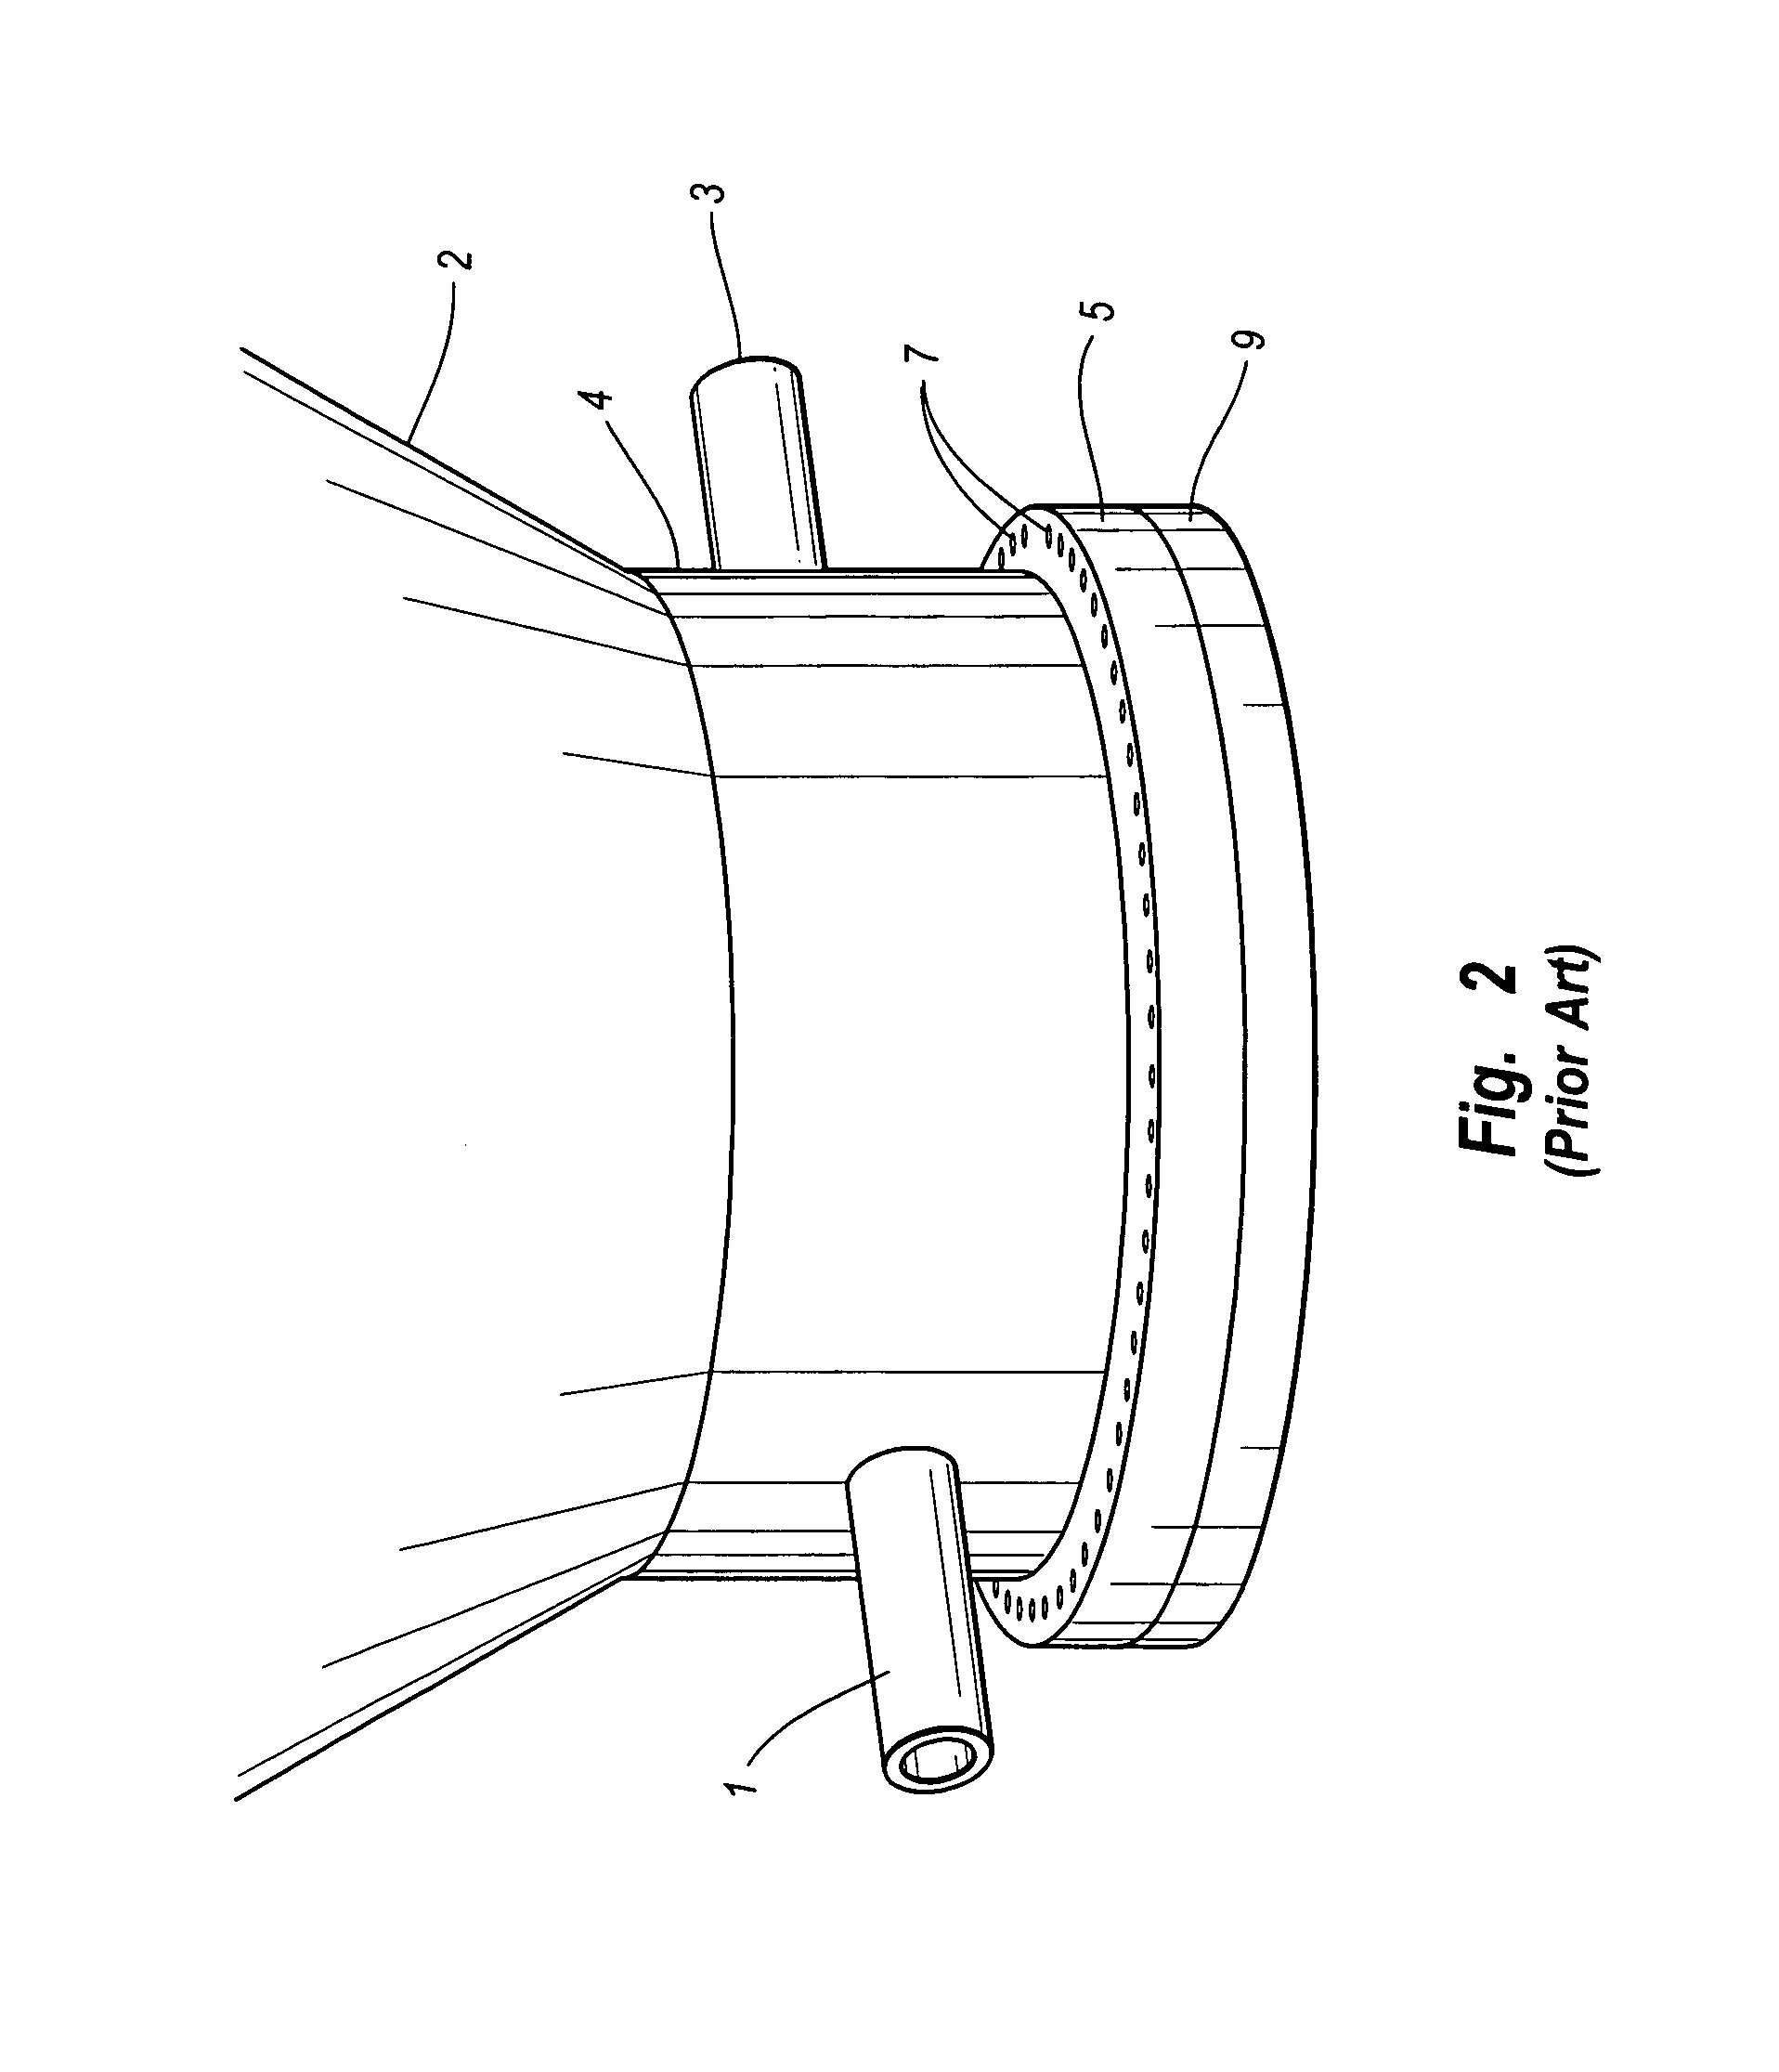 Tangential dispenser and system for use within a delayed coking system